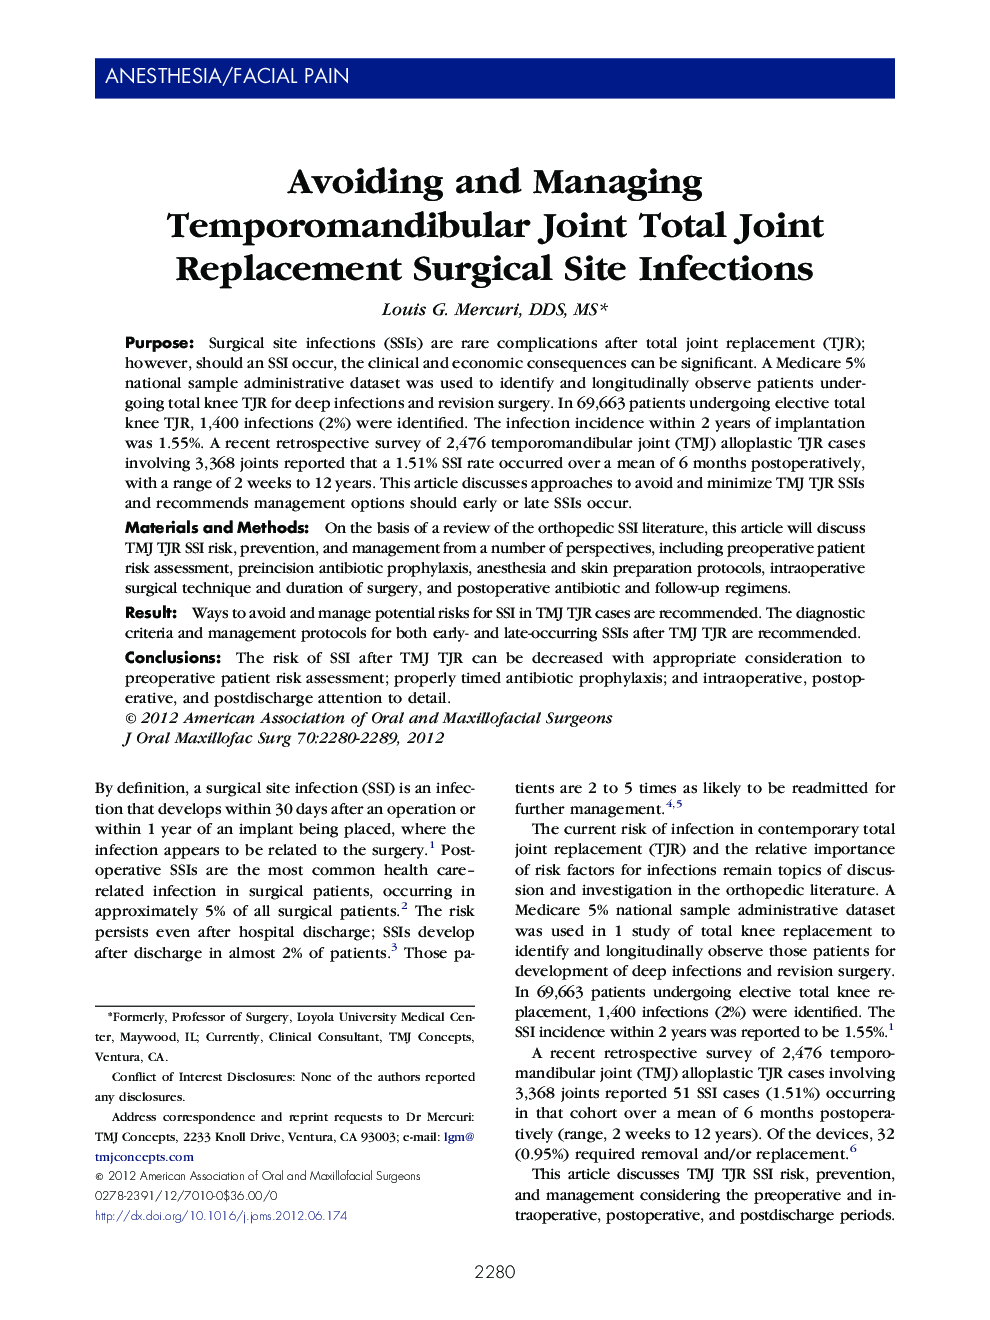 Avoiding and Managing Temporomandibular Joint Total Joint Replacement Surgical Site Infections